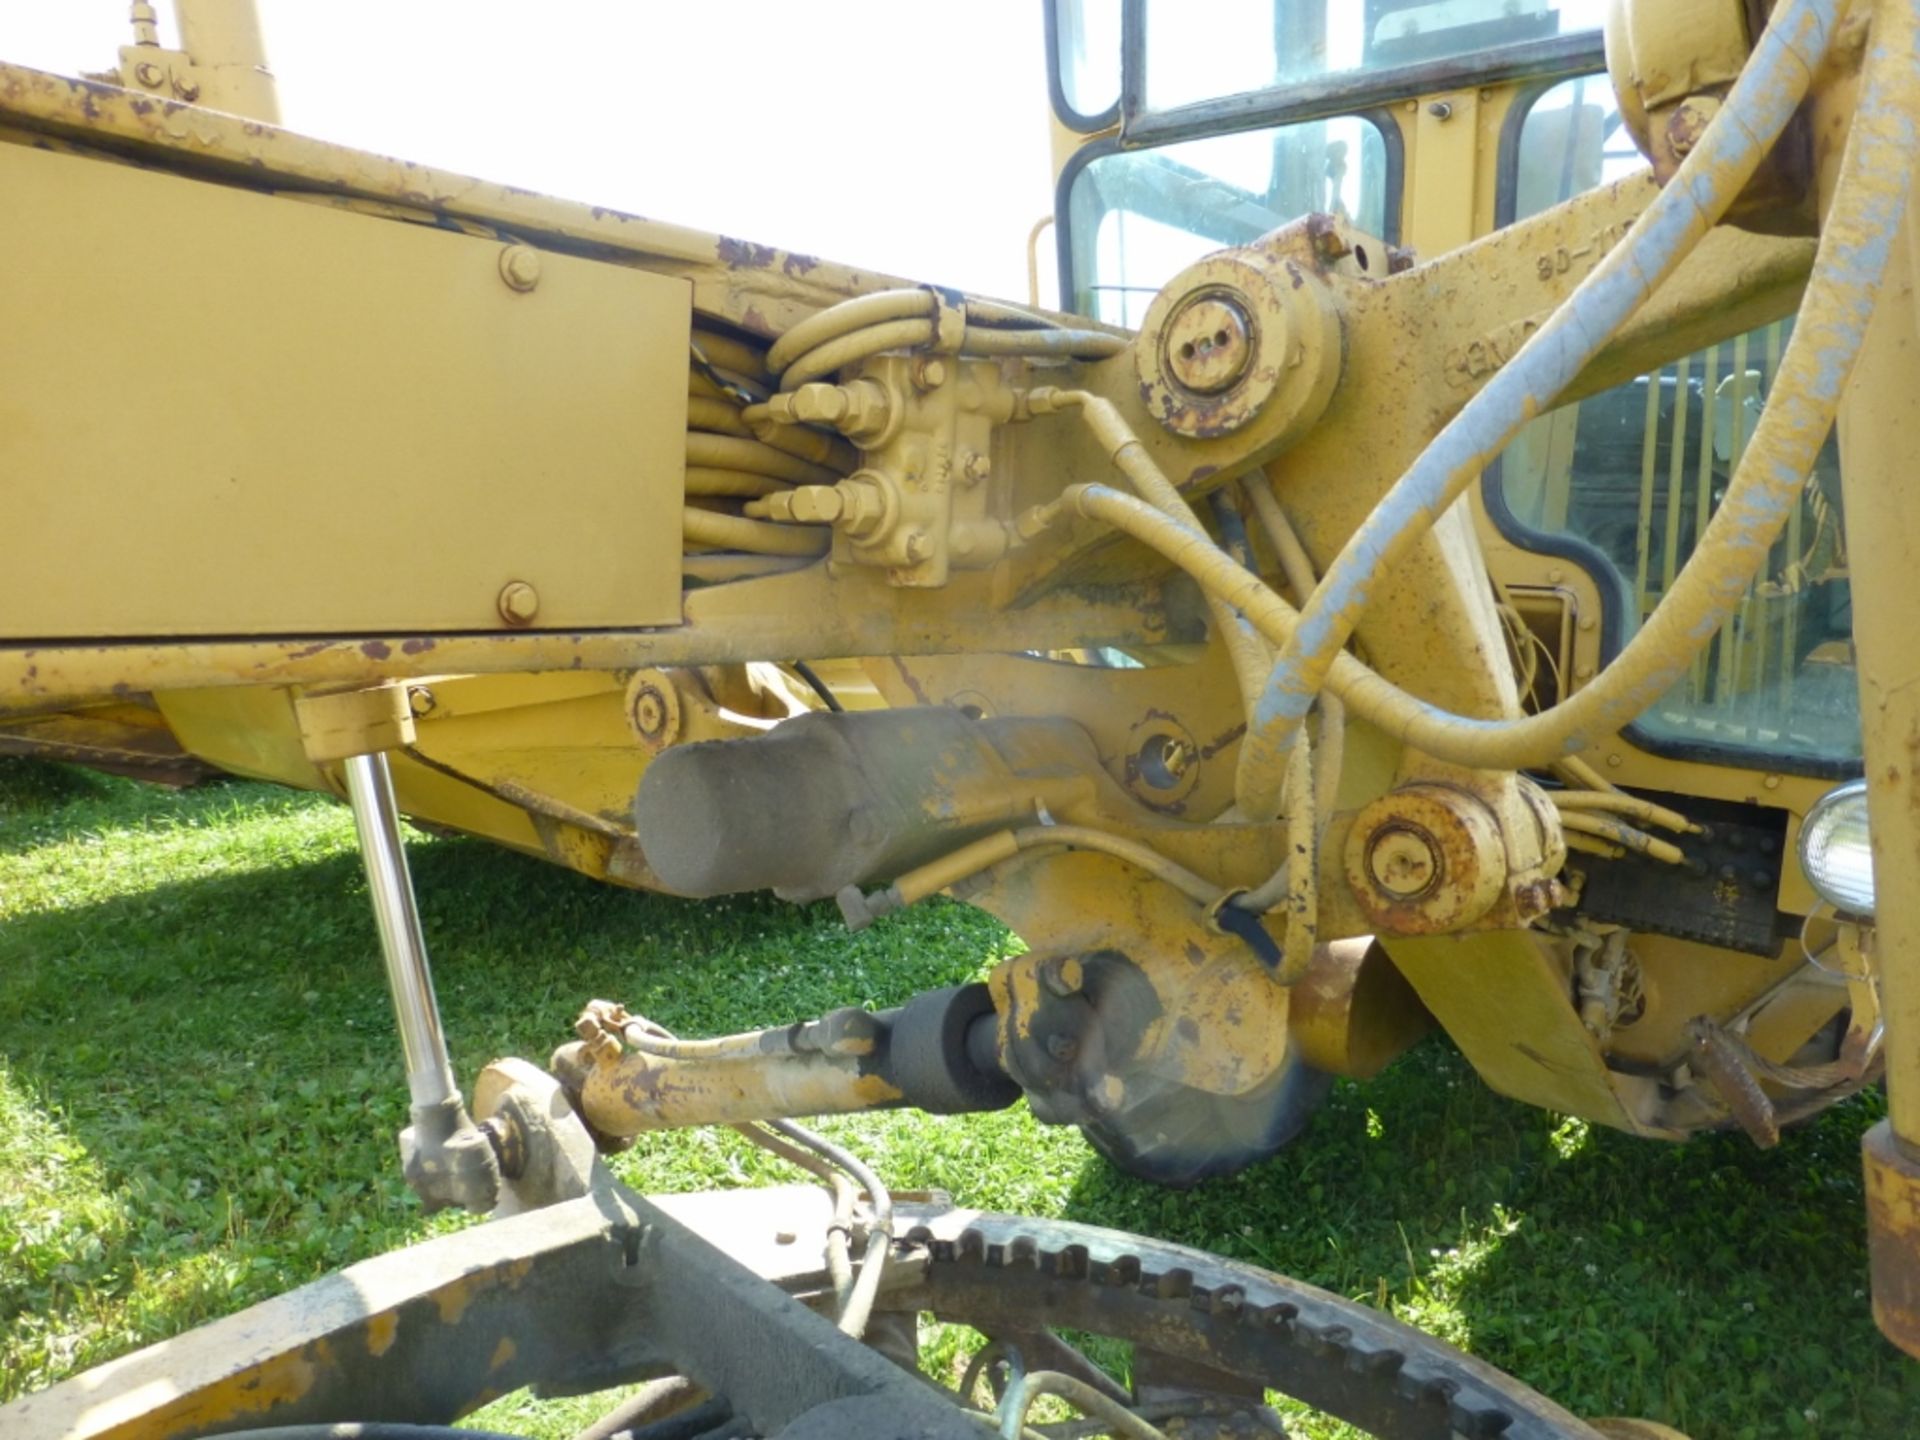 Caterpillar 120G motor grader with 13'10" moldboard se:87v871. Power shift. 7720 unverified hrs. - Image 18 of 27